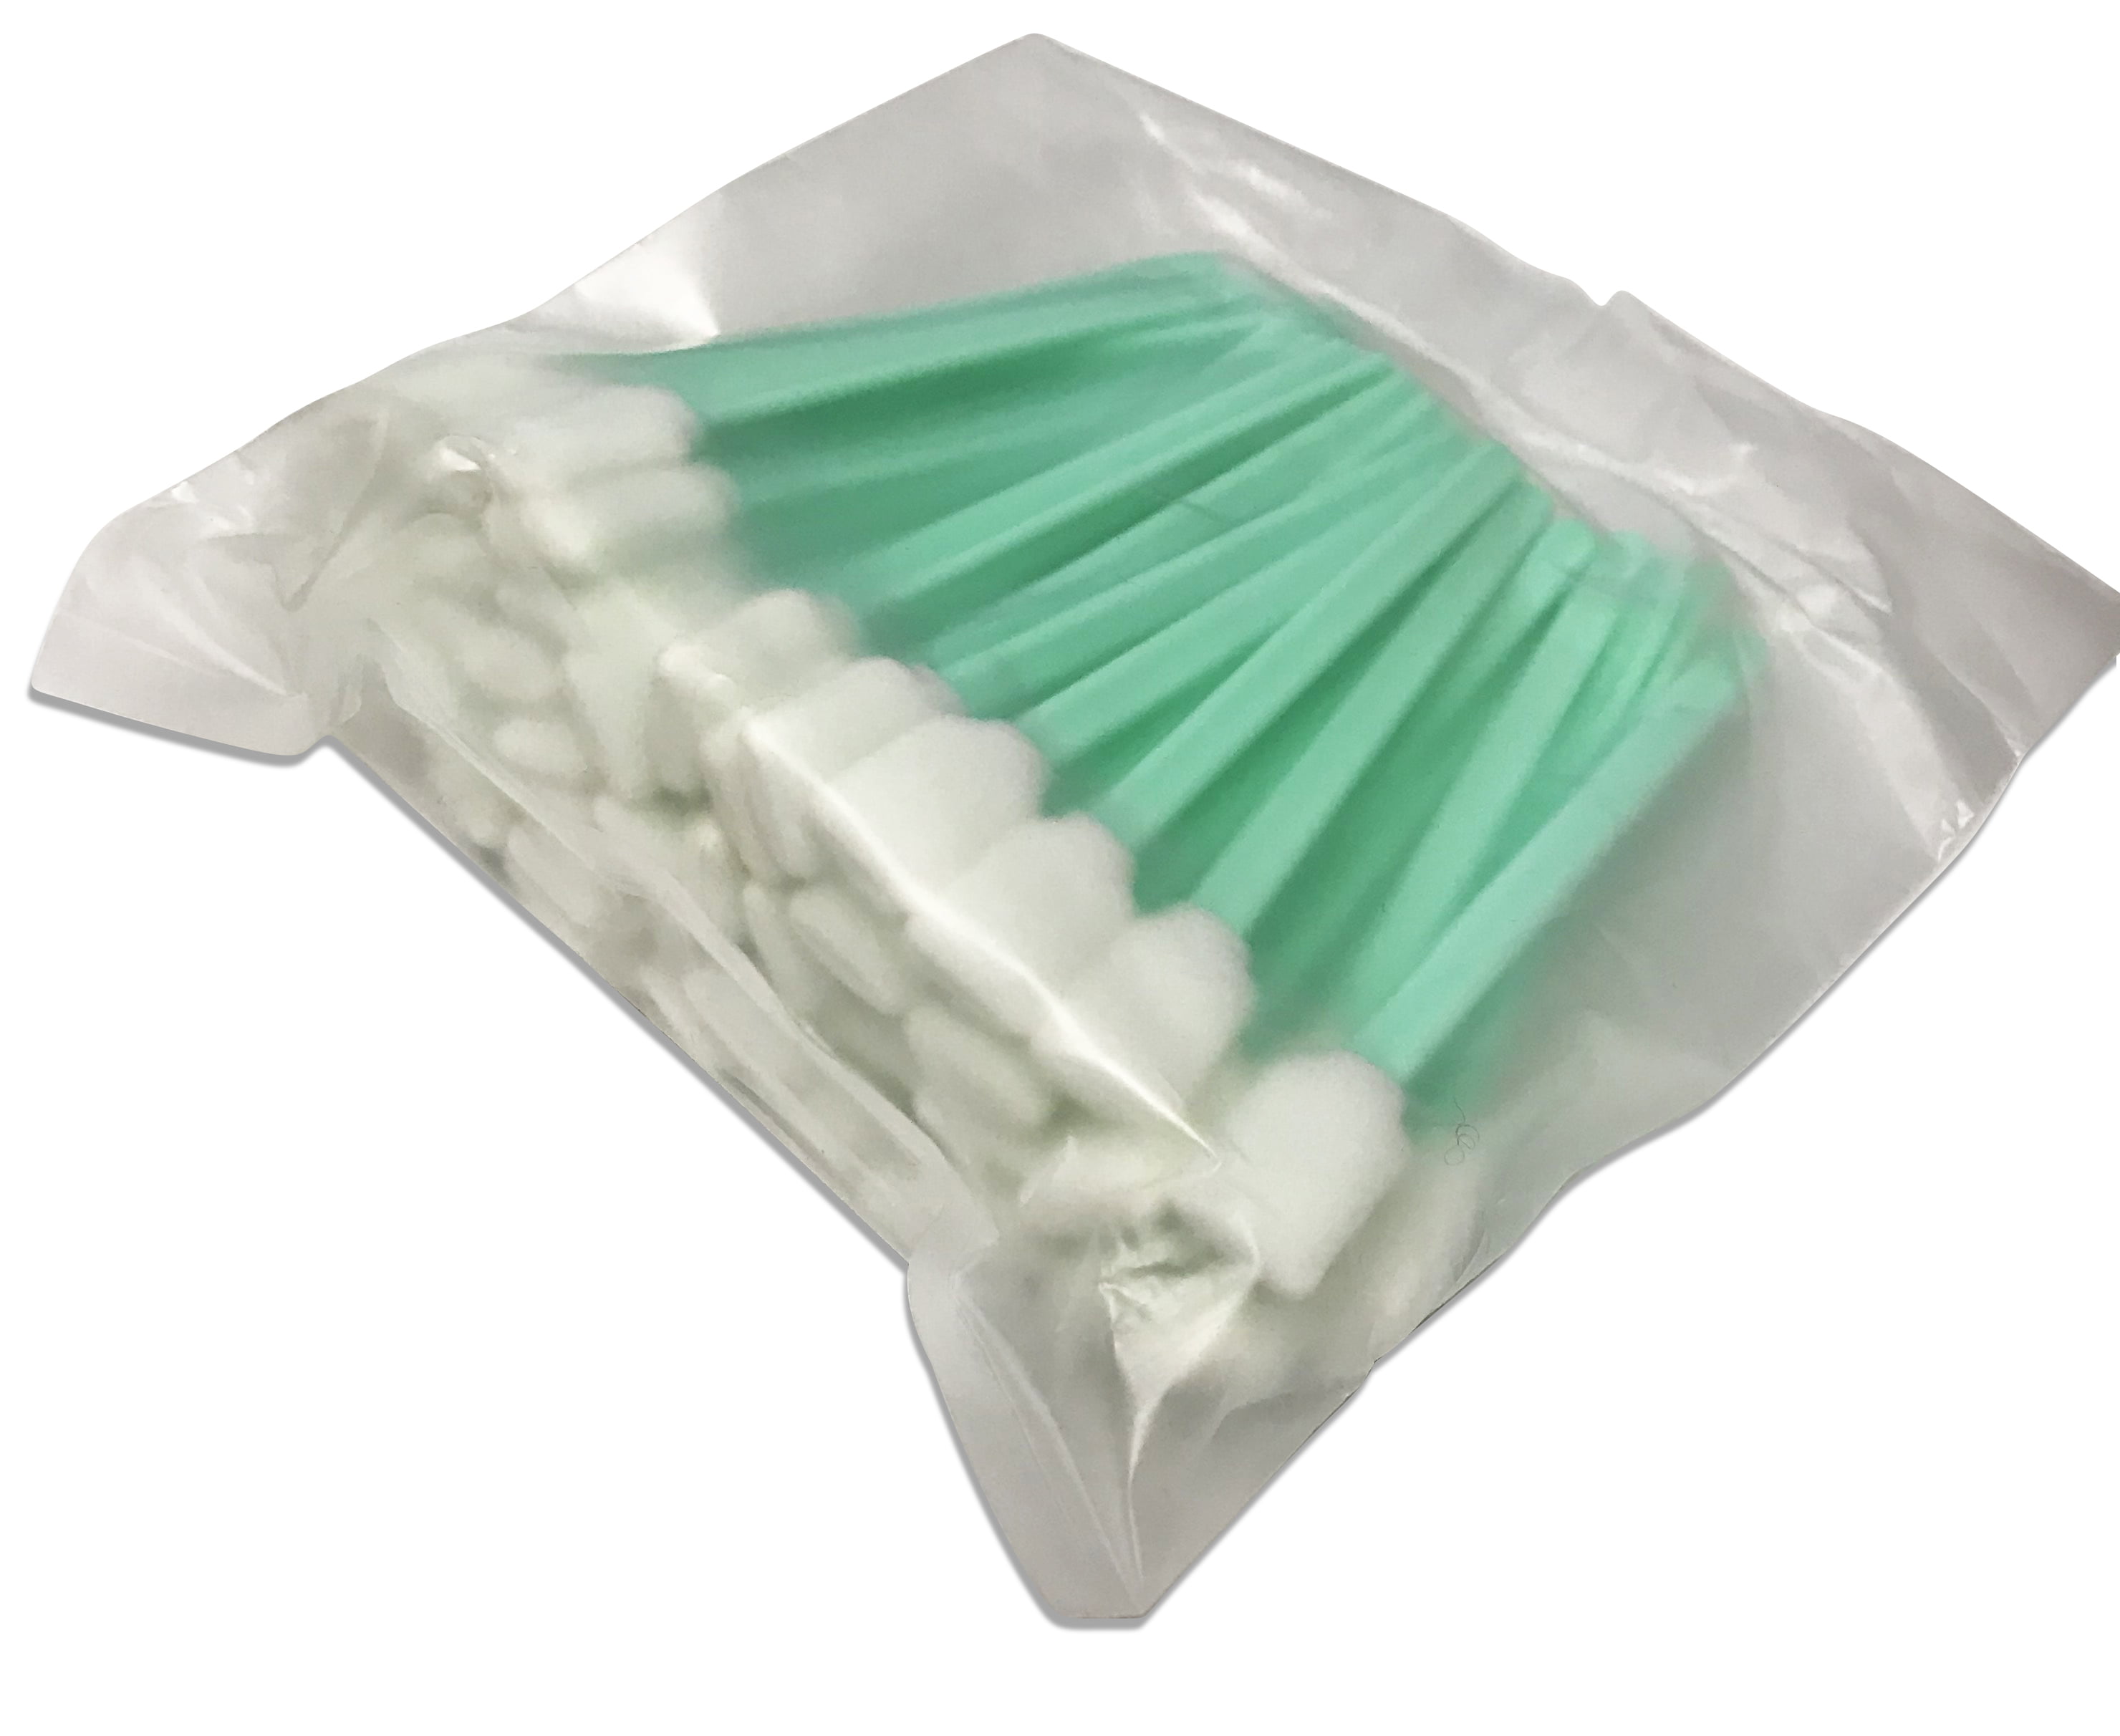 Details about   Cleaning Swabs Sponge Stick For Epson/roland/mimaki/mutoh Eco Solvent Printer 